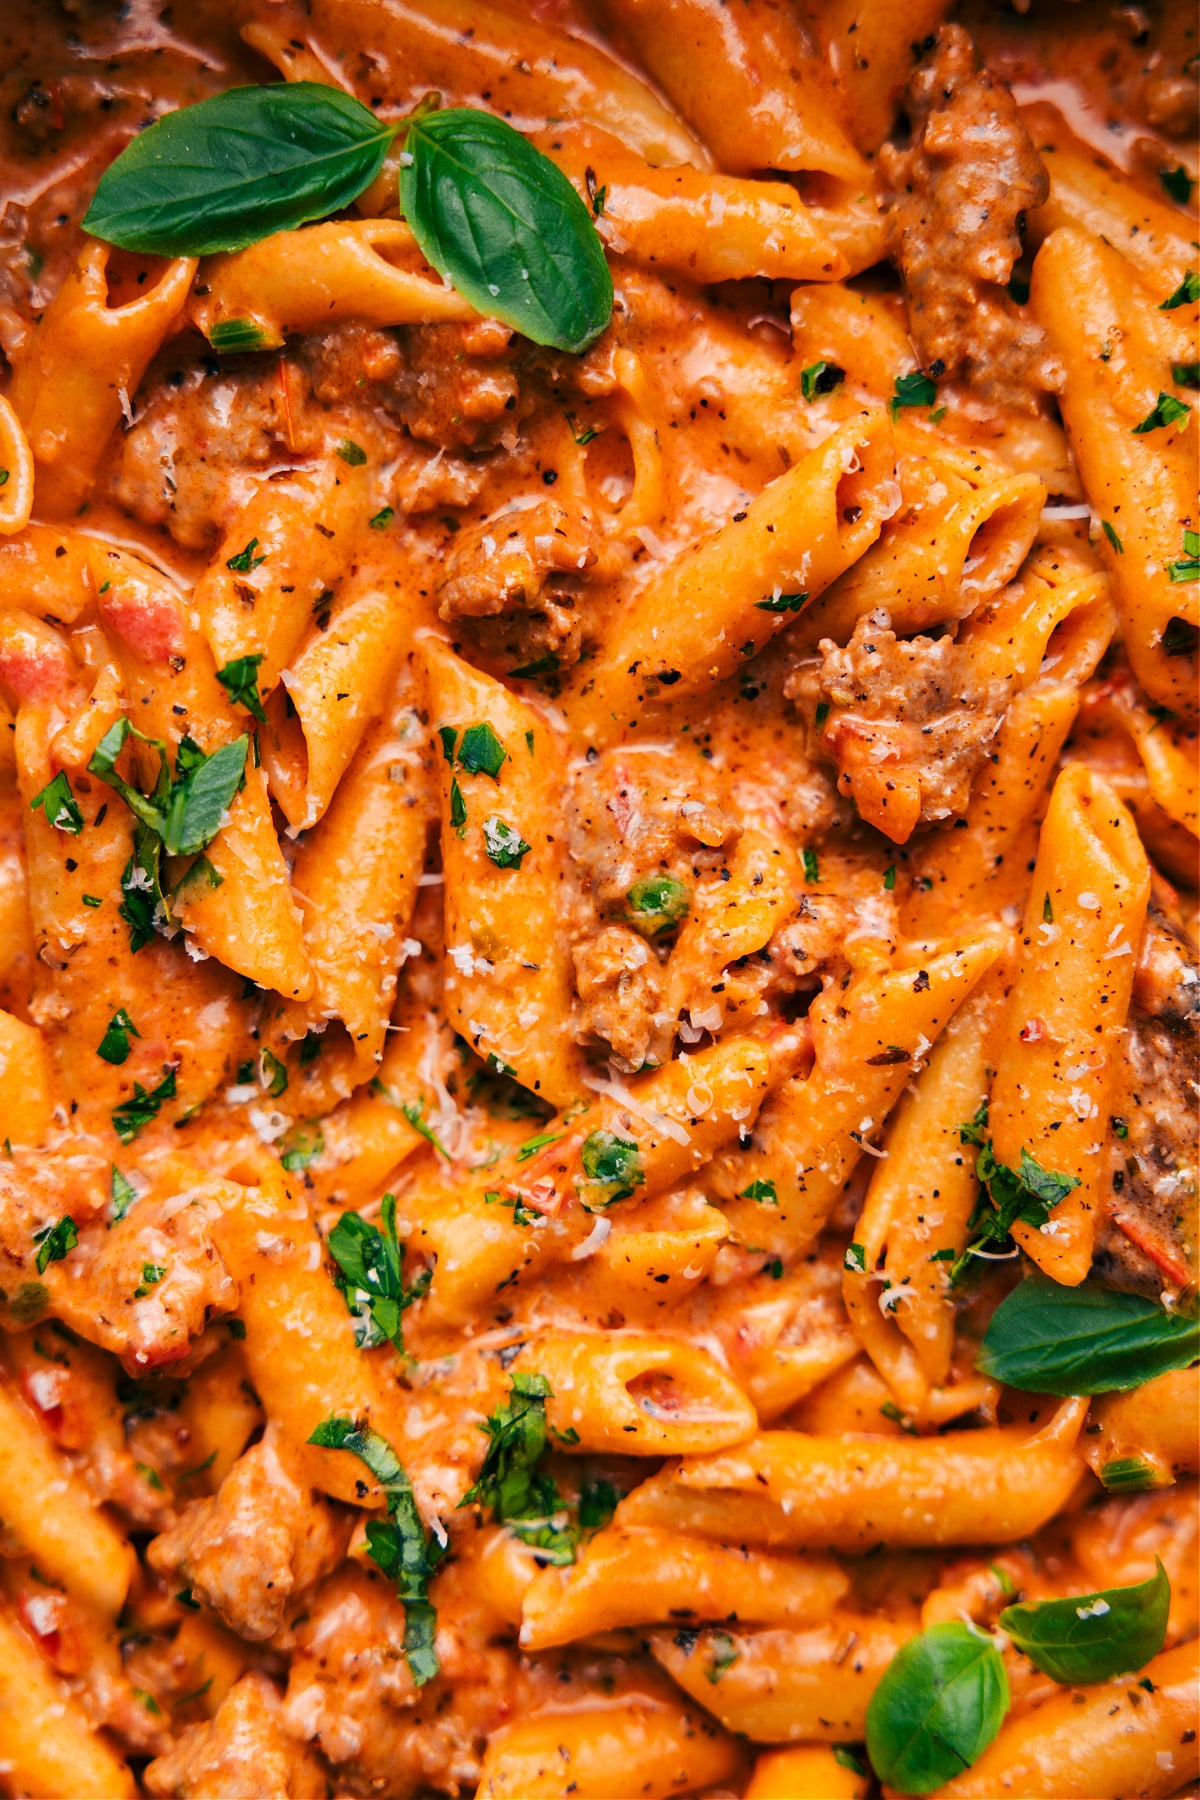 Close-up View of Penne Pasta with Italian Sausage Dish.